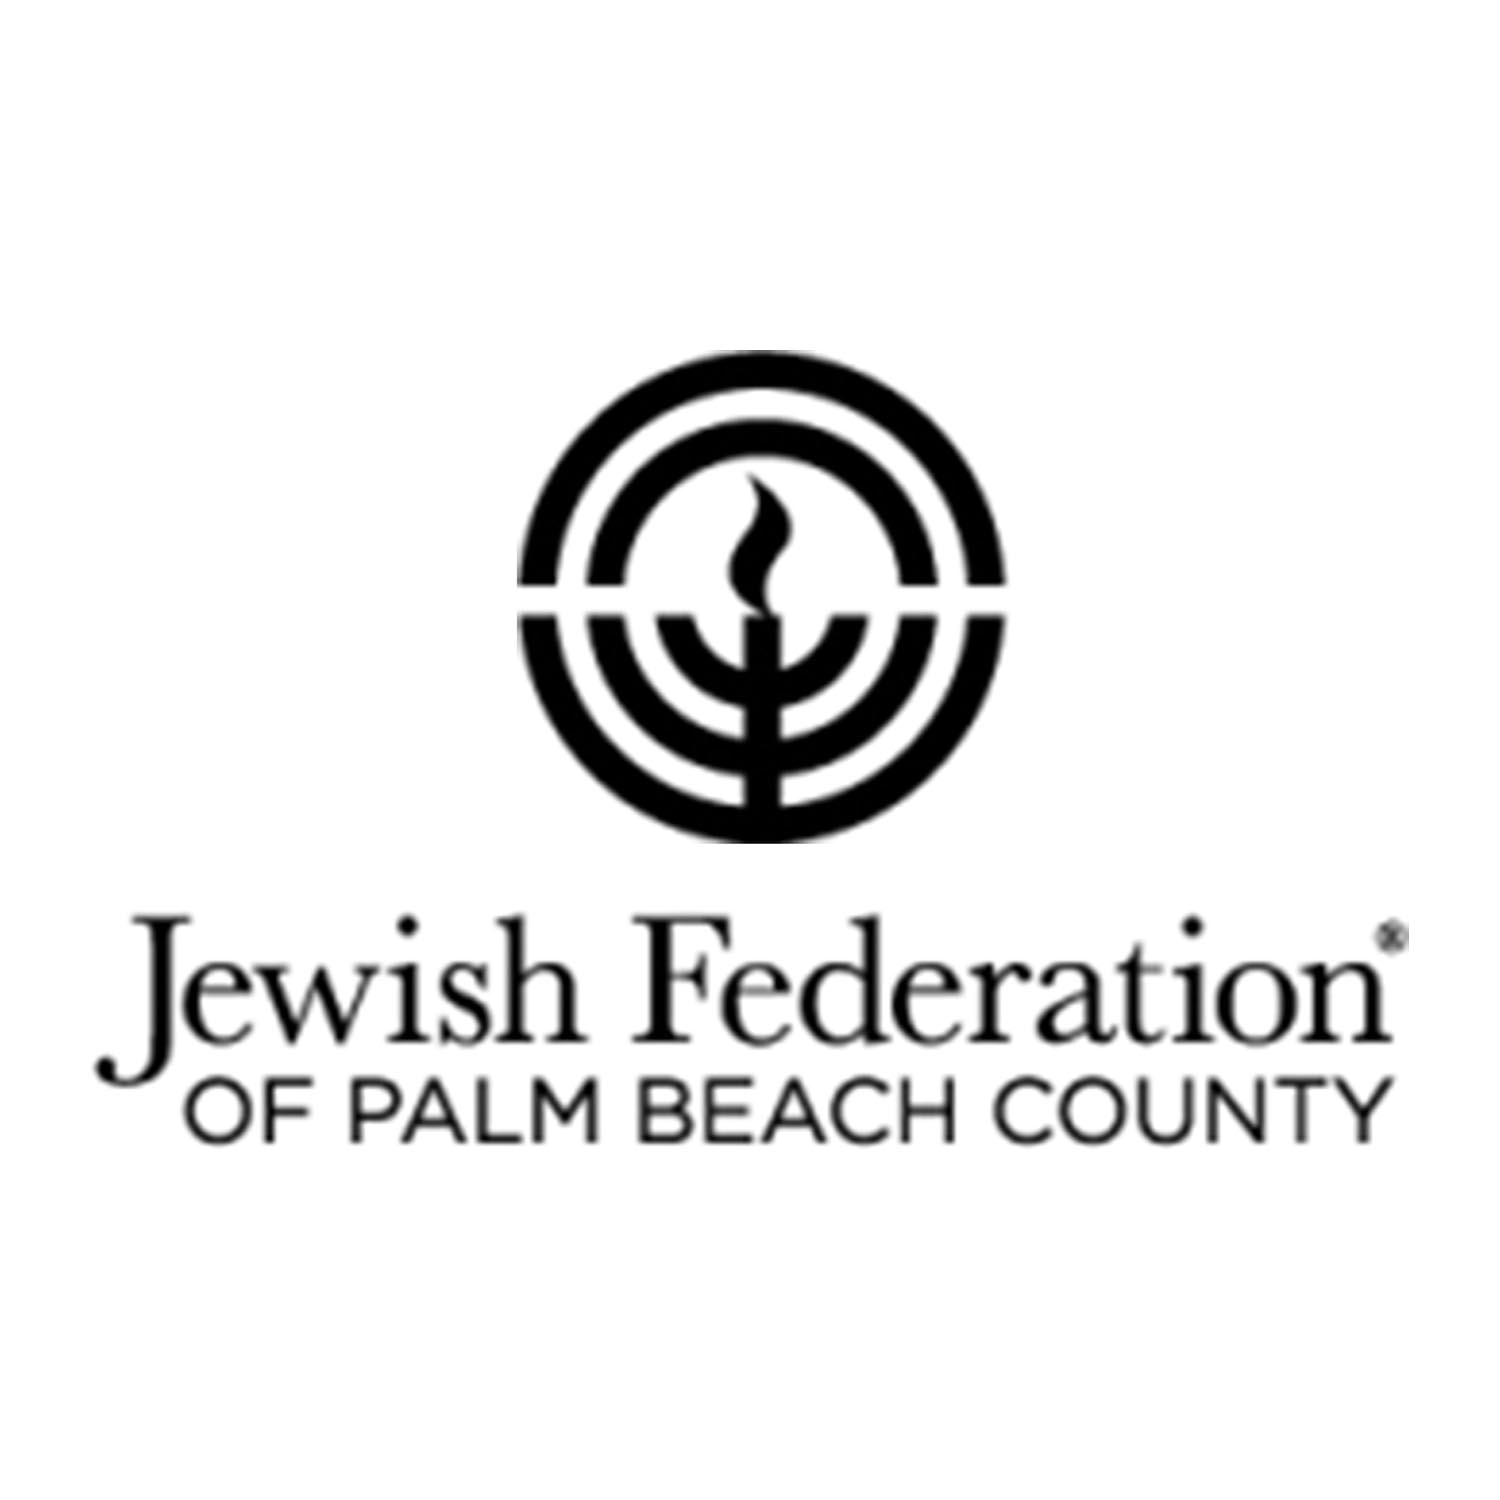 Partners of Jewish Federation of Palm Beach County